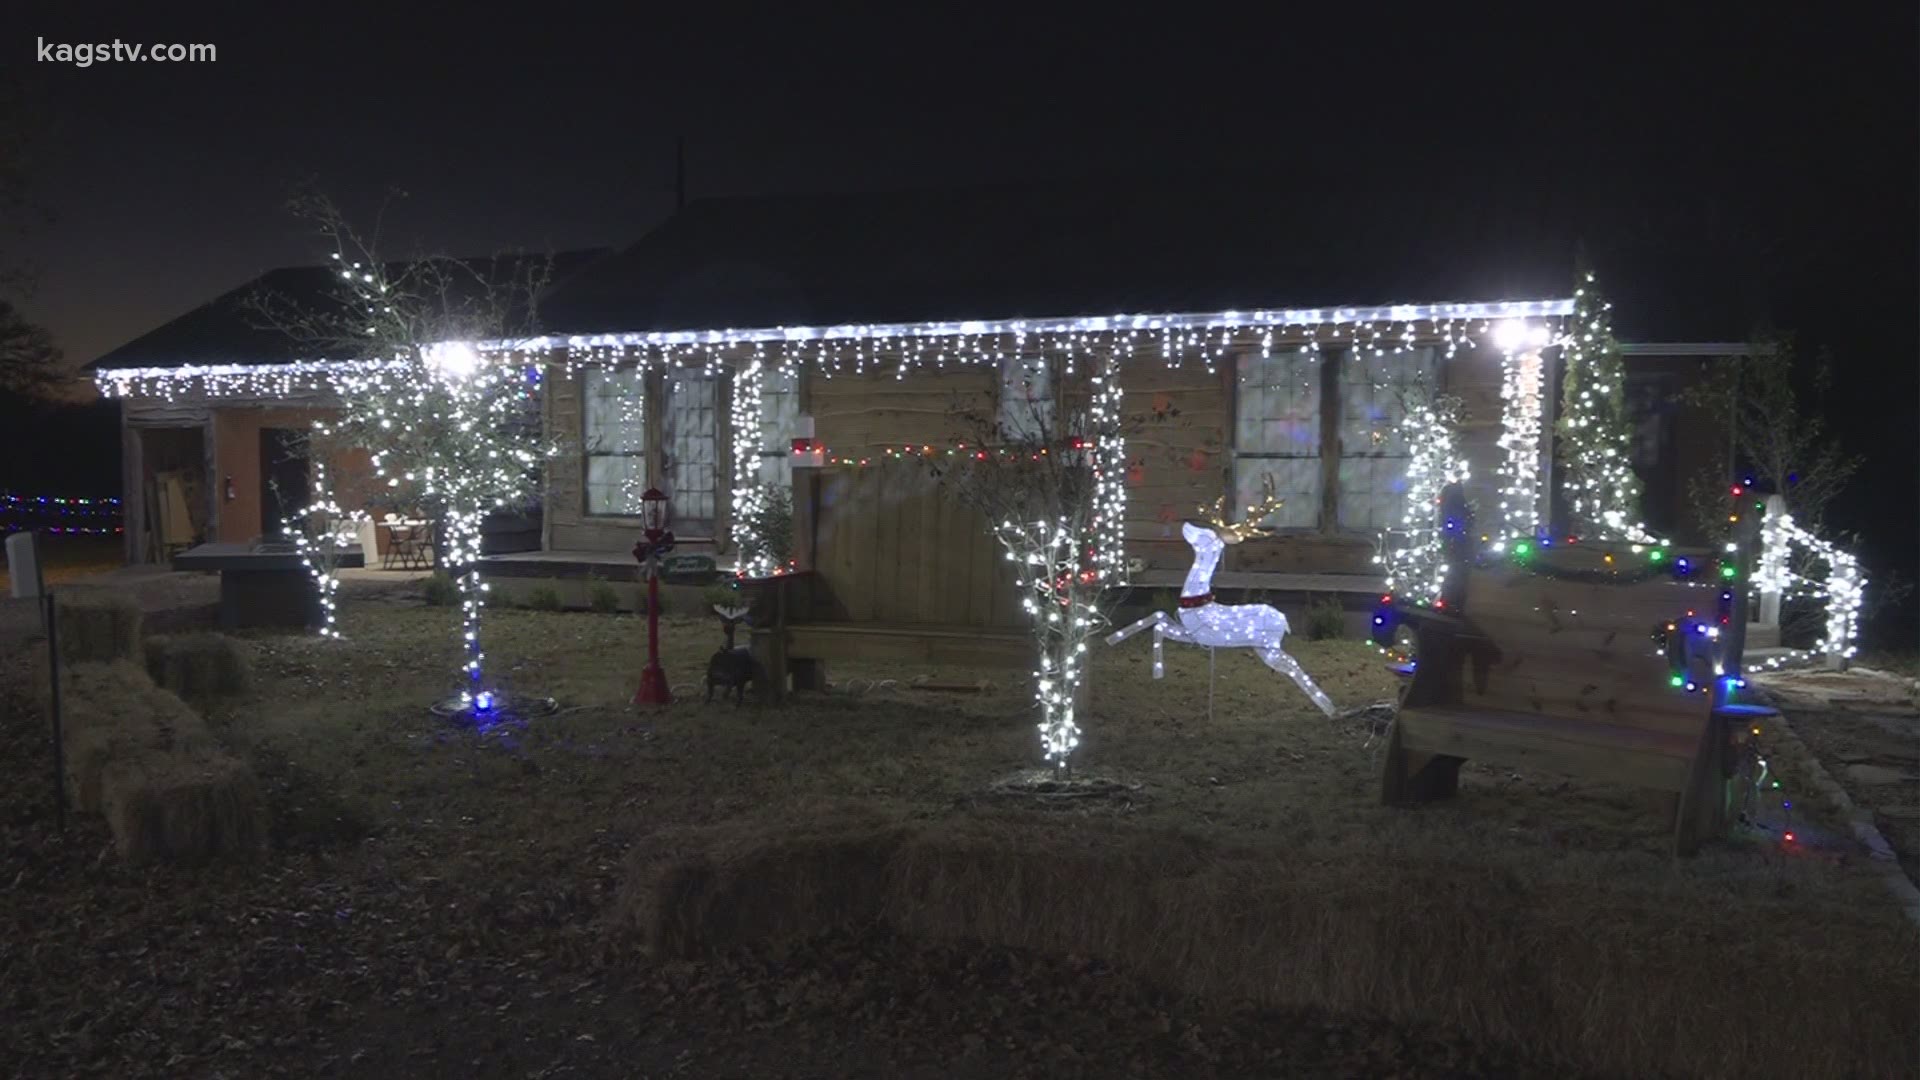 A new holiday destination opens up in the Brazos Valley.